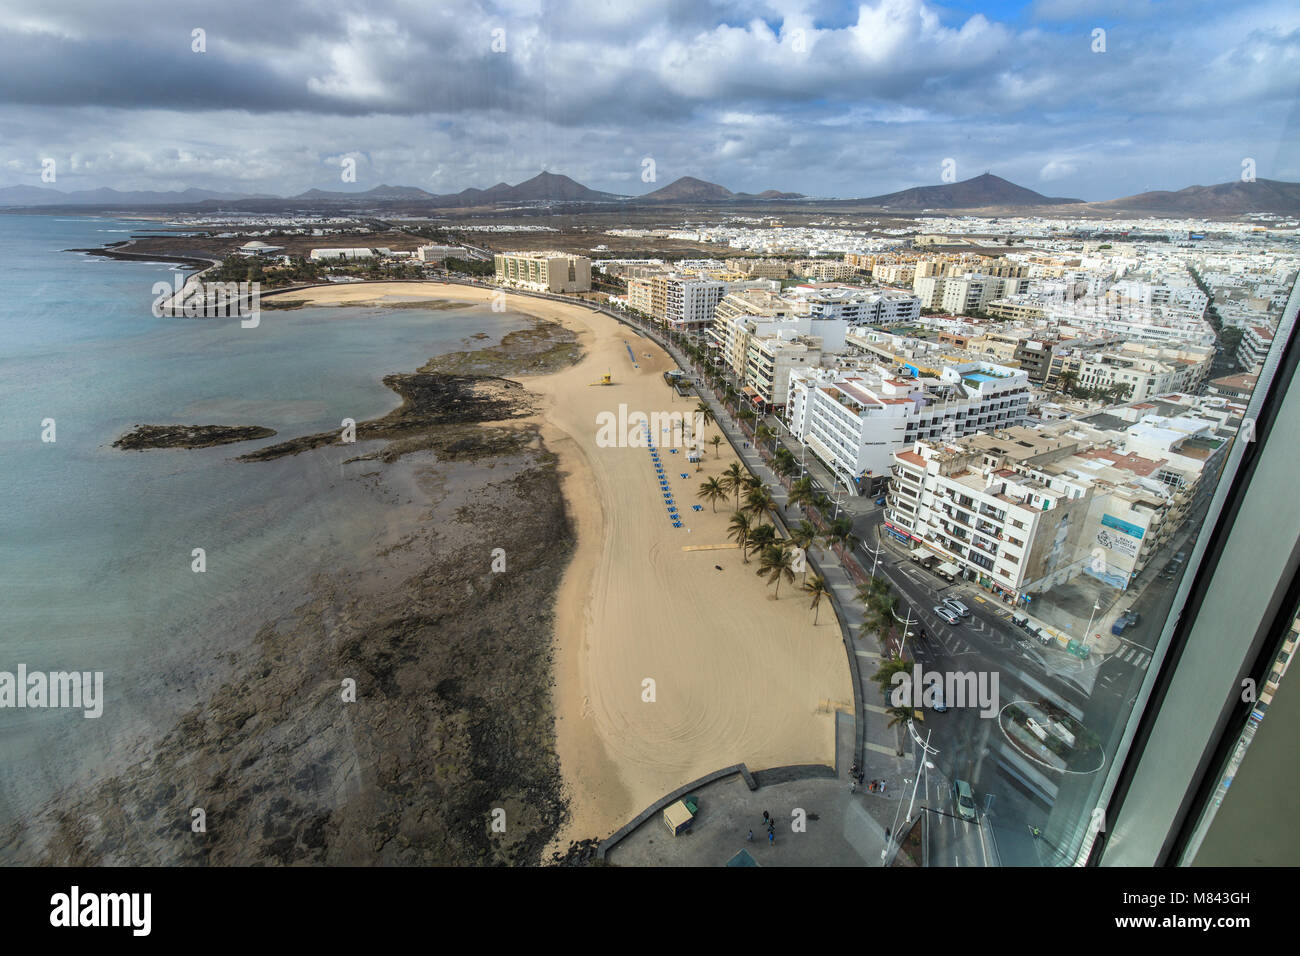 View from the 17th floor of the Gran Hotel, Arrecife Lanzarote Stock Photo